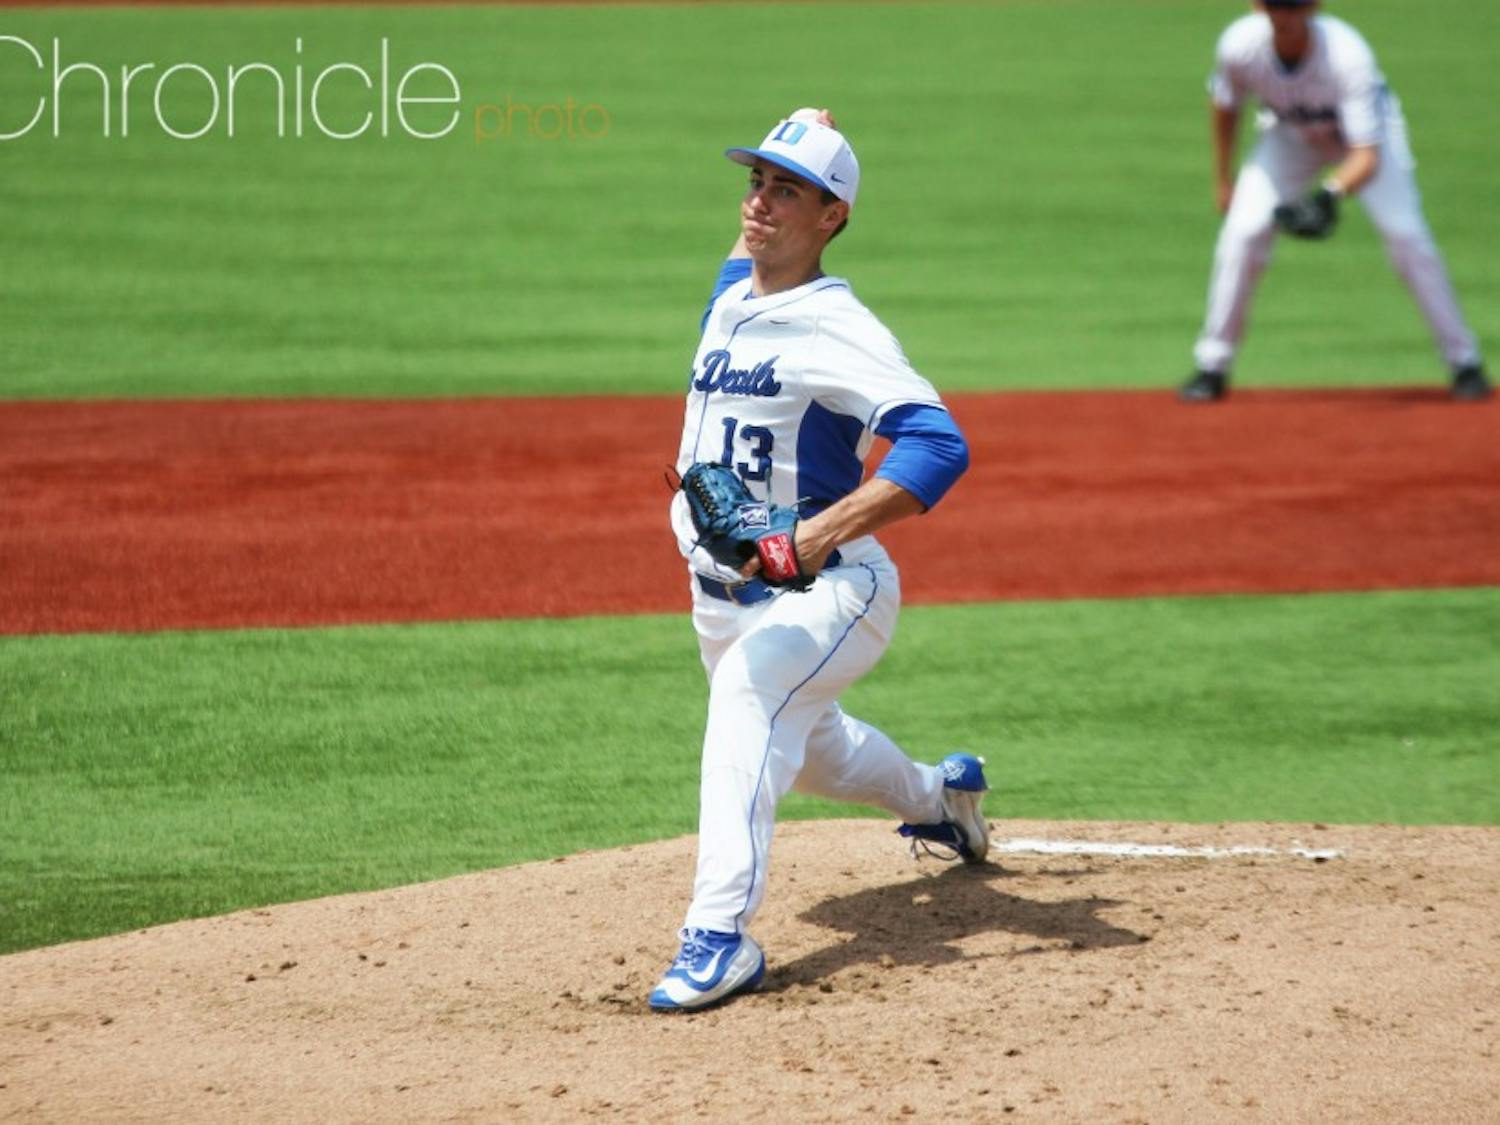 Ryan Day surrendered just two runs in a career-high eight innings Saturday, but the Blue Devil offense did not give him enough support for a win.